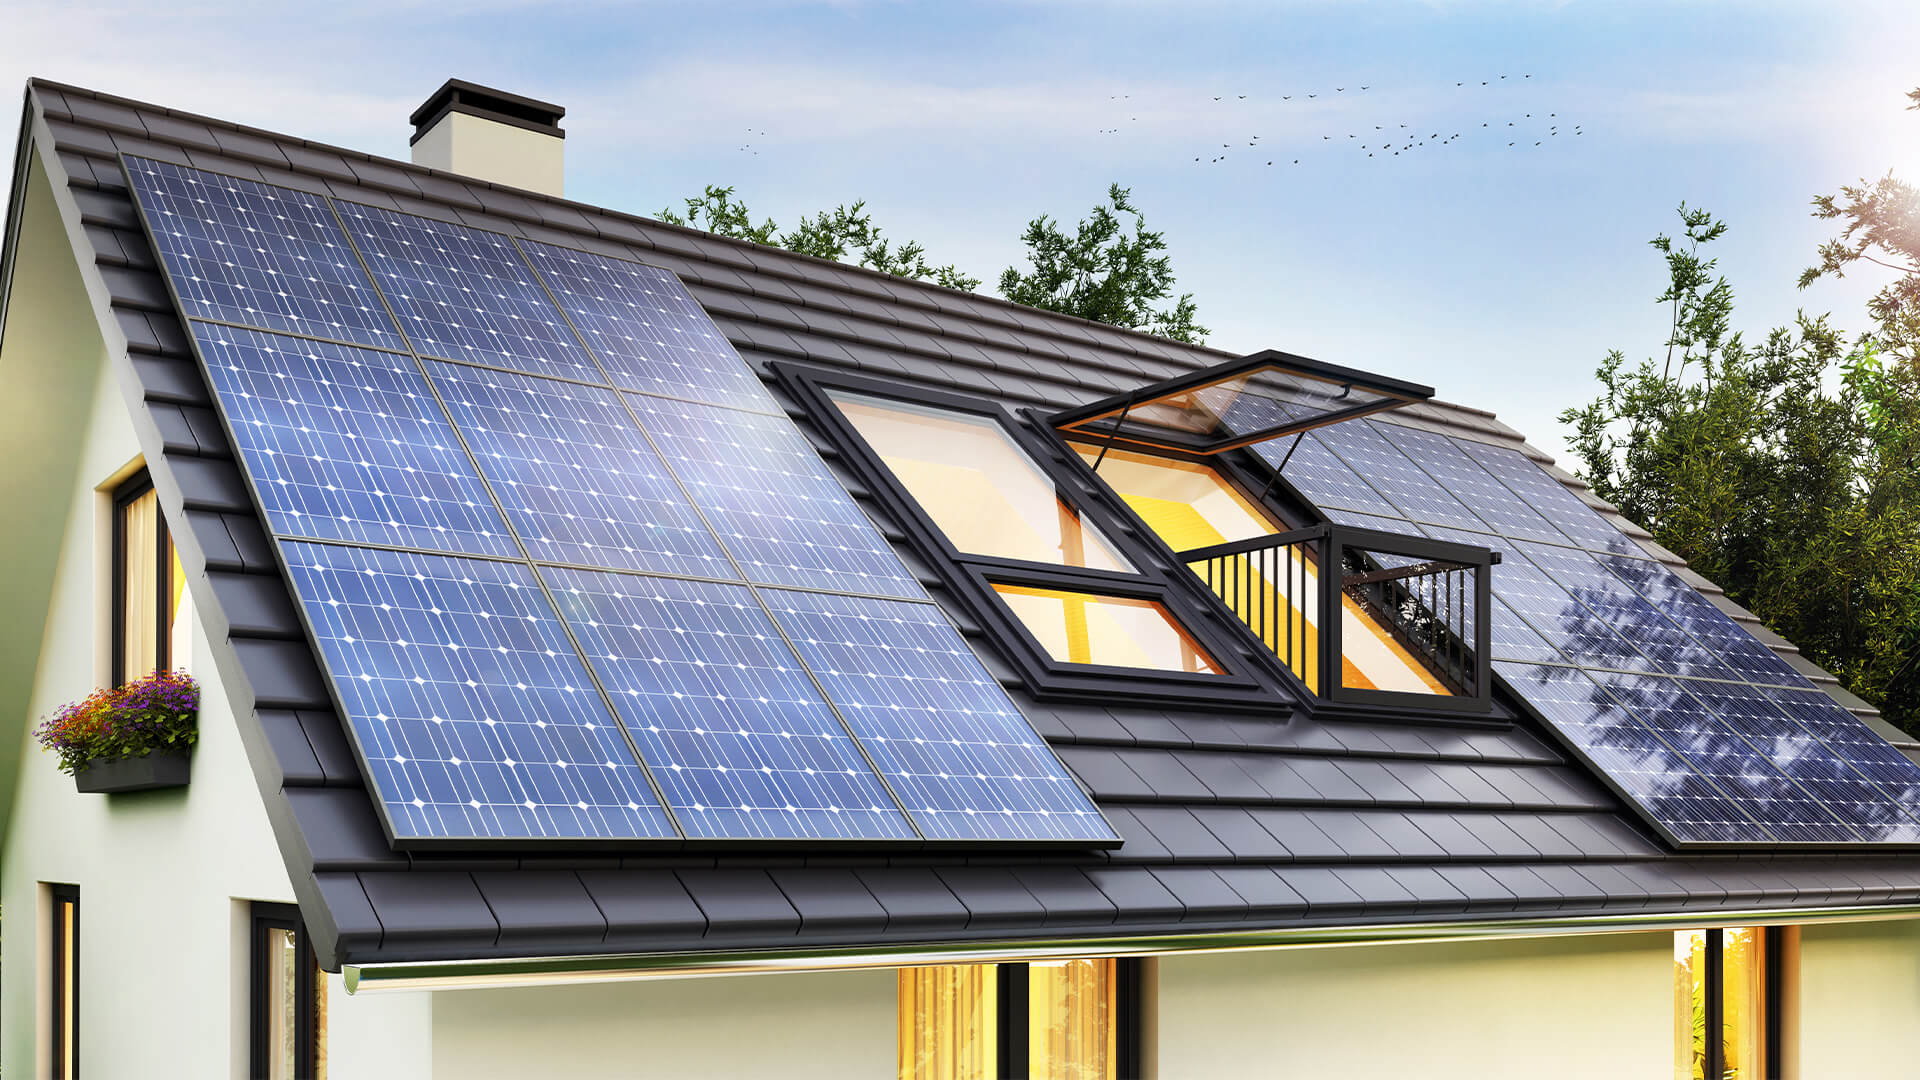 How Long Can Home Solar Panels Last?